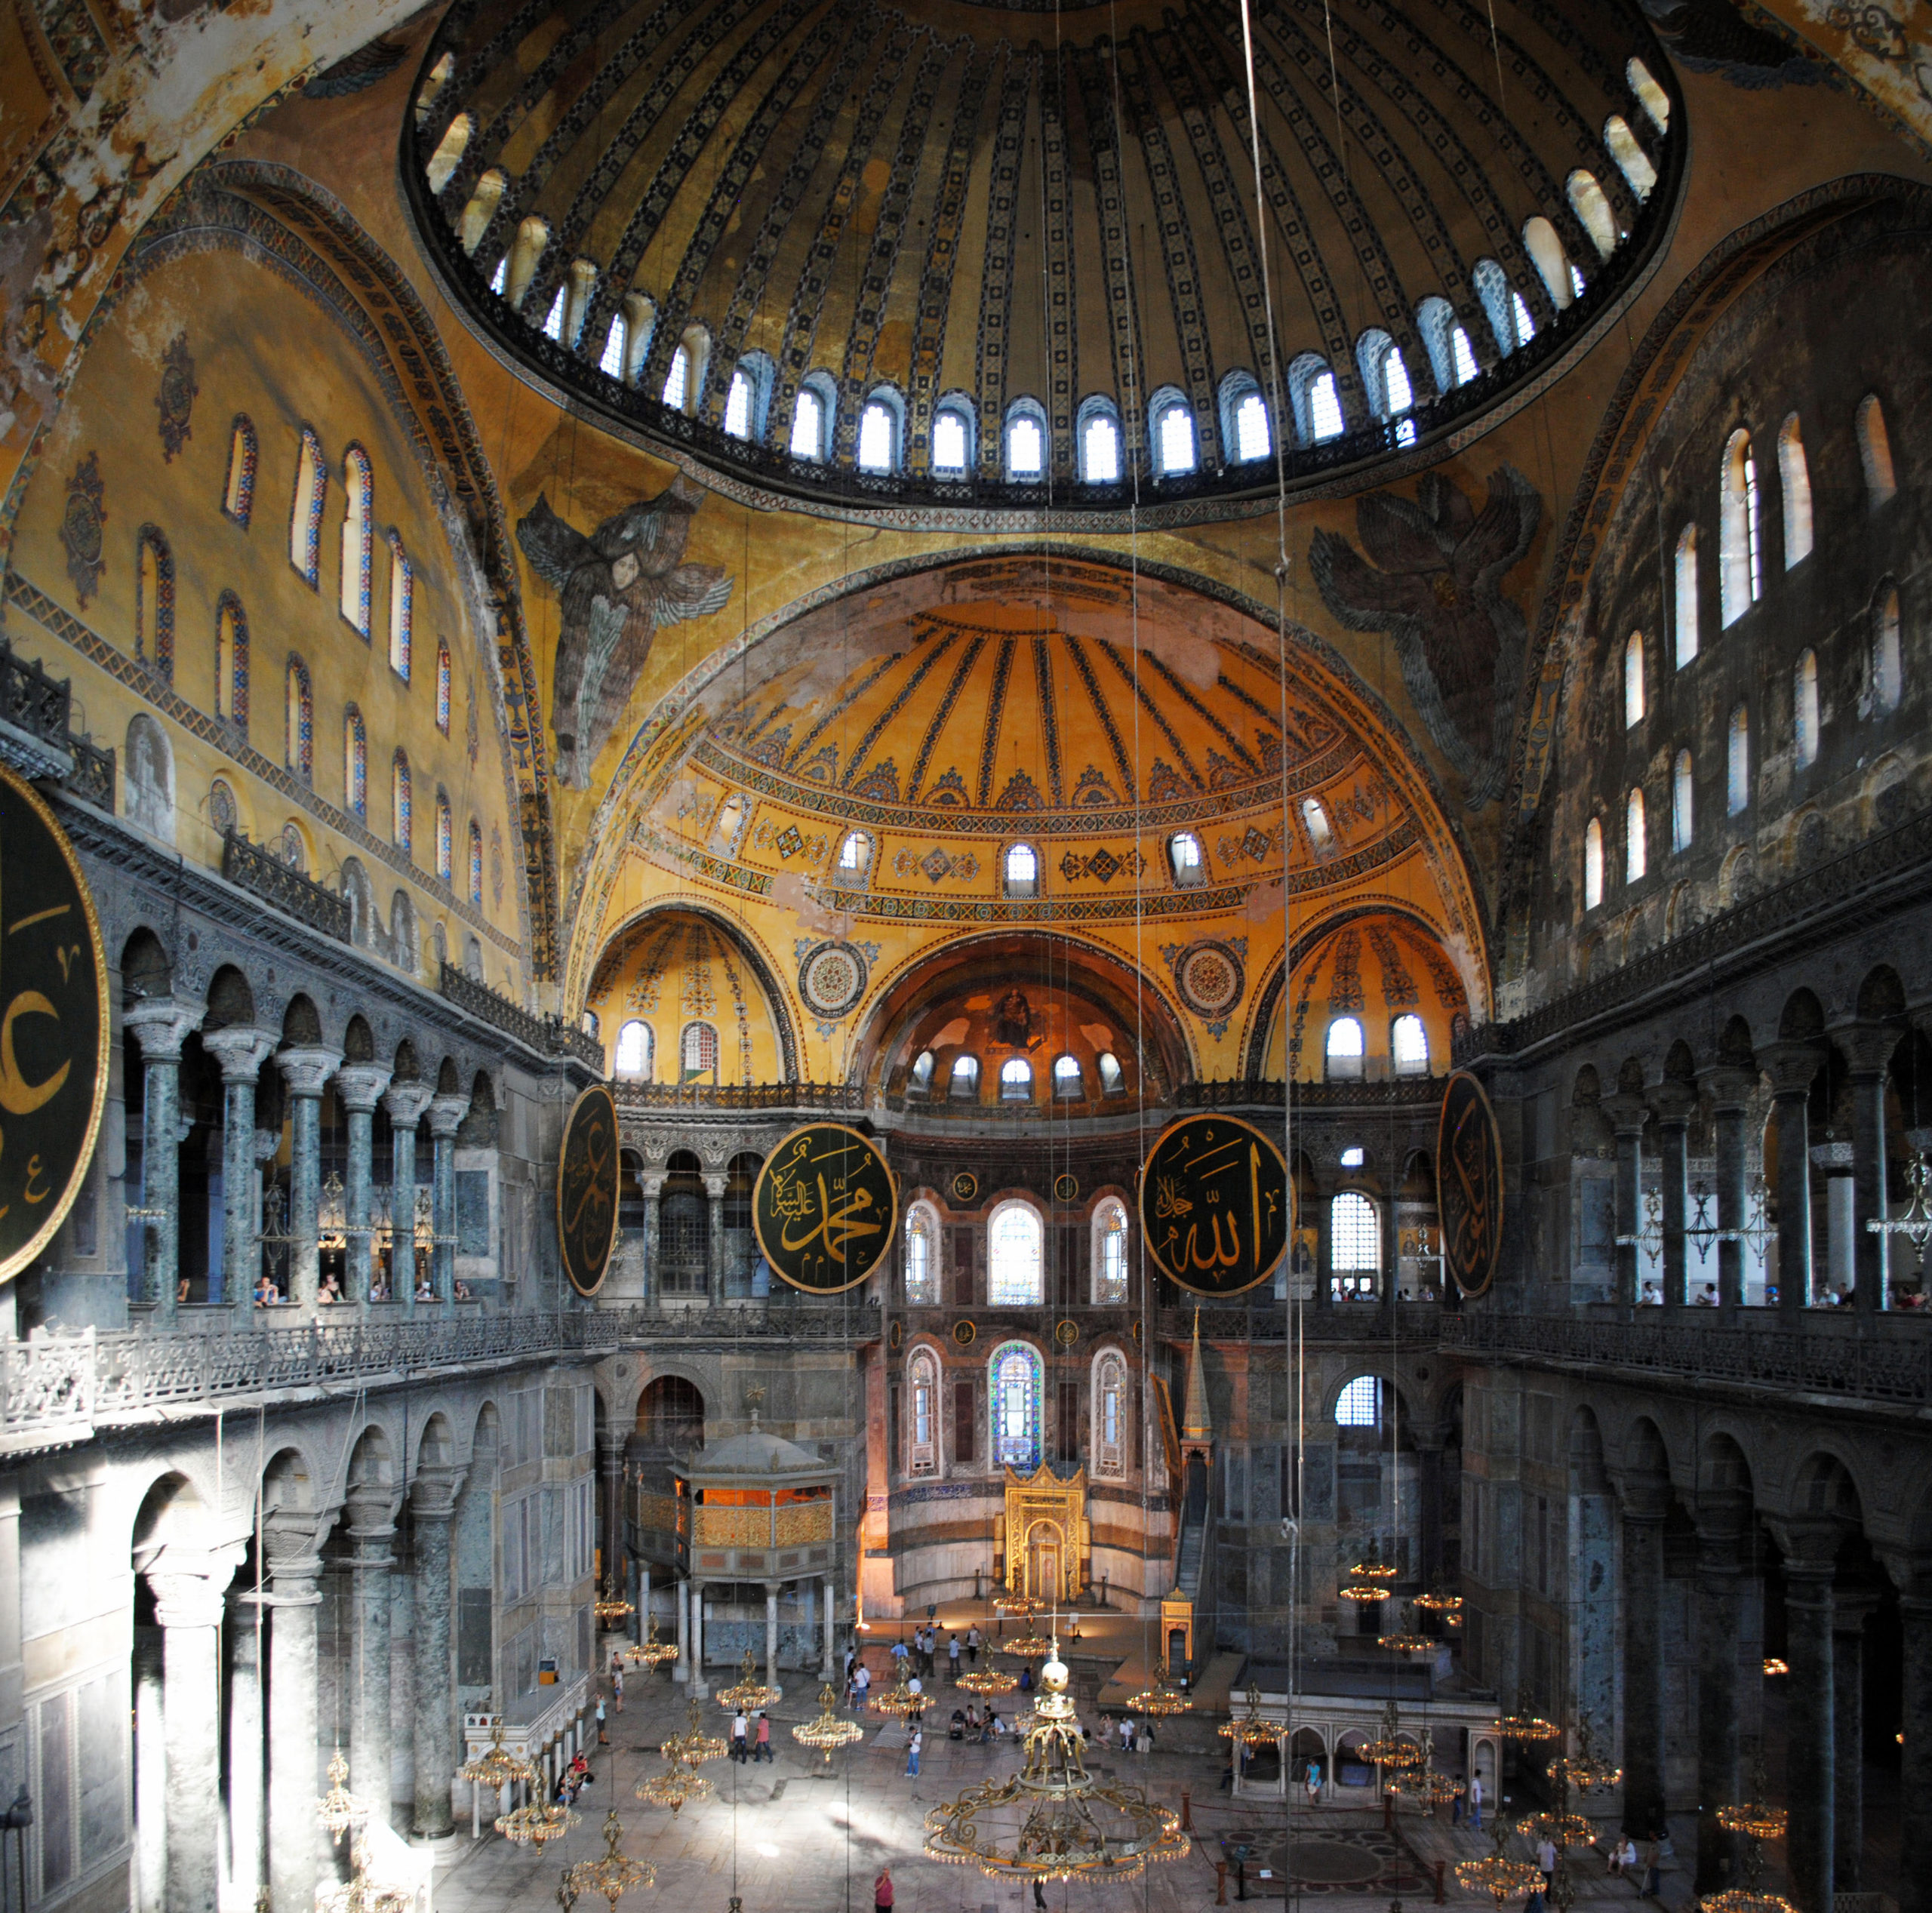 Isidore of Miletus & Anthemius of Tralles for Emperor Justinian, Hagia Sophia, Constantinople (Istanbul), 532-37 (photo: © Robert G. Ousterhout)